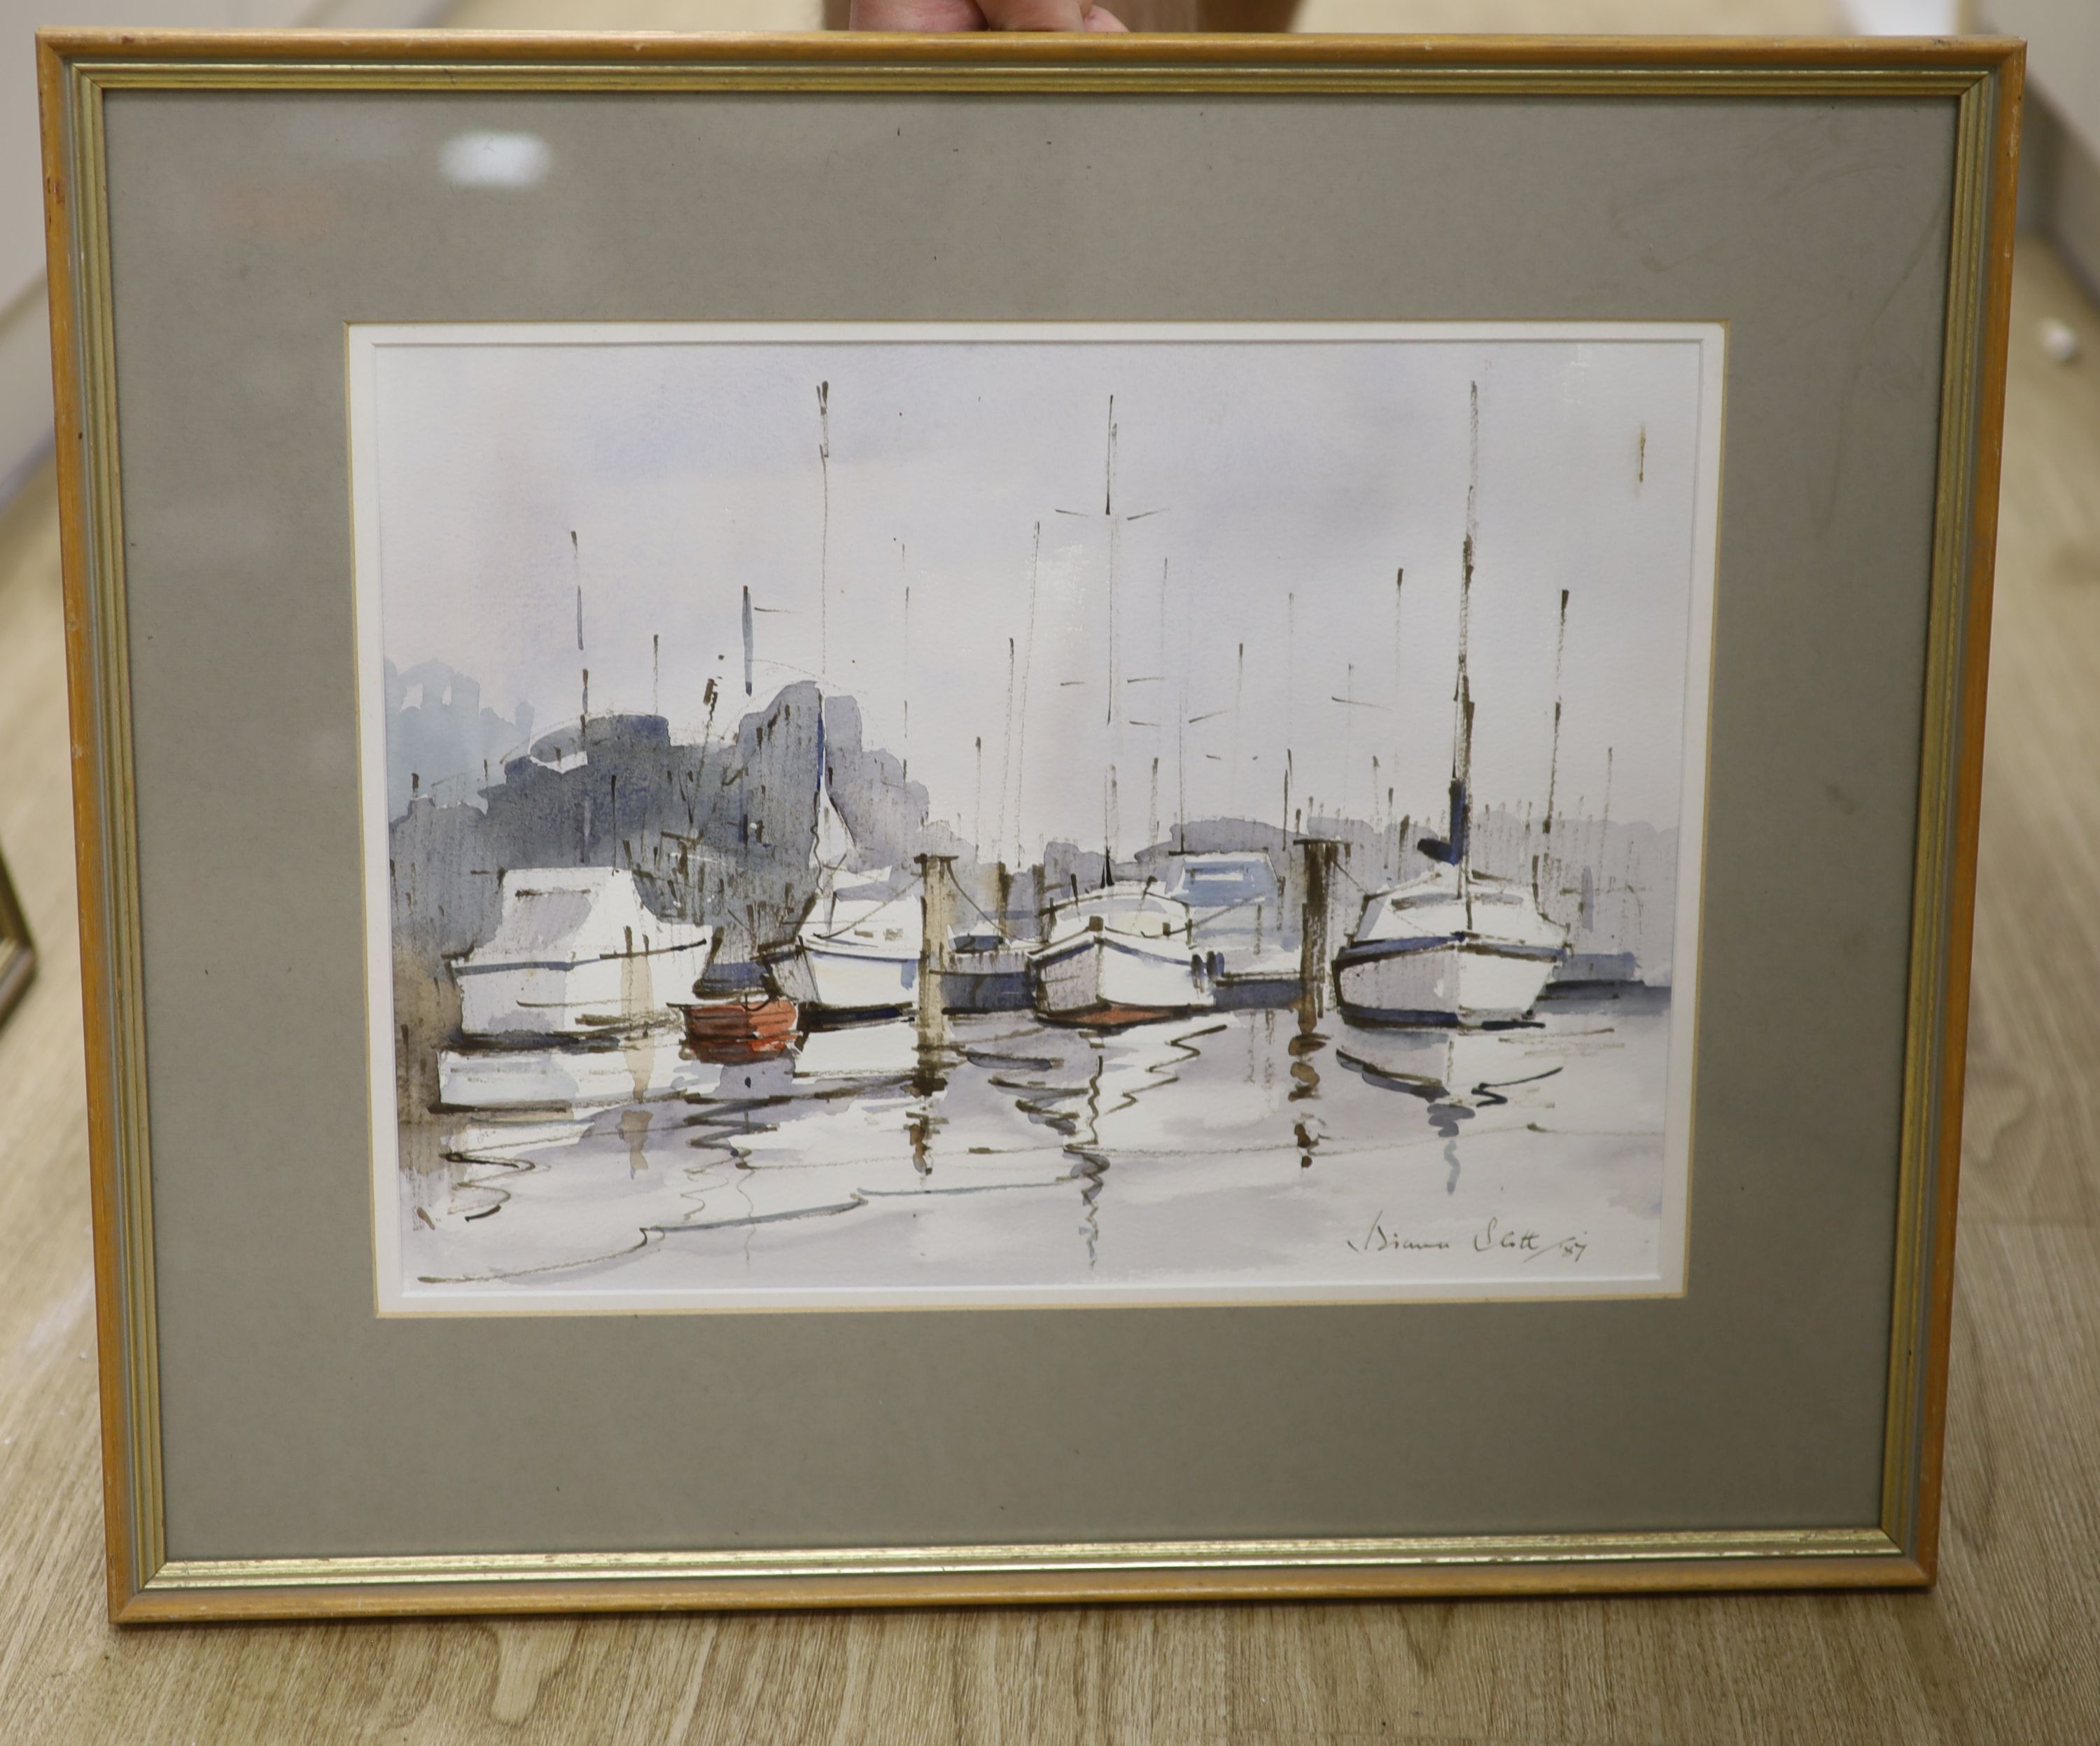 Diana Scott, watercolour, yachts in harbour, 28 x 38cm and a watercolour of Roses by M.Best, 33 x 40cm.